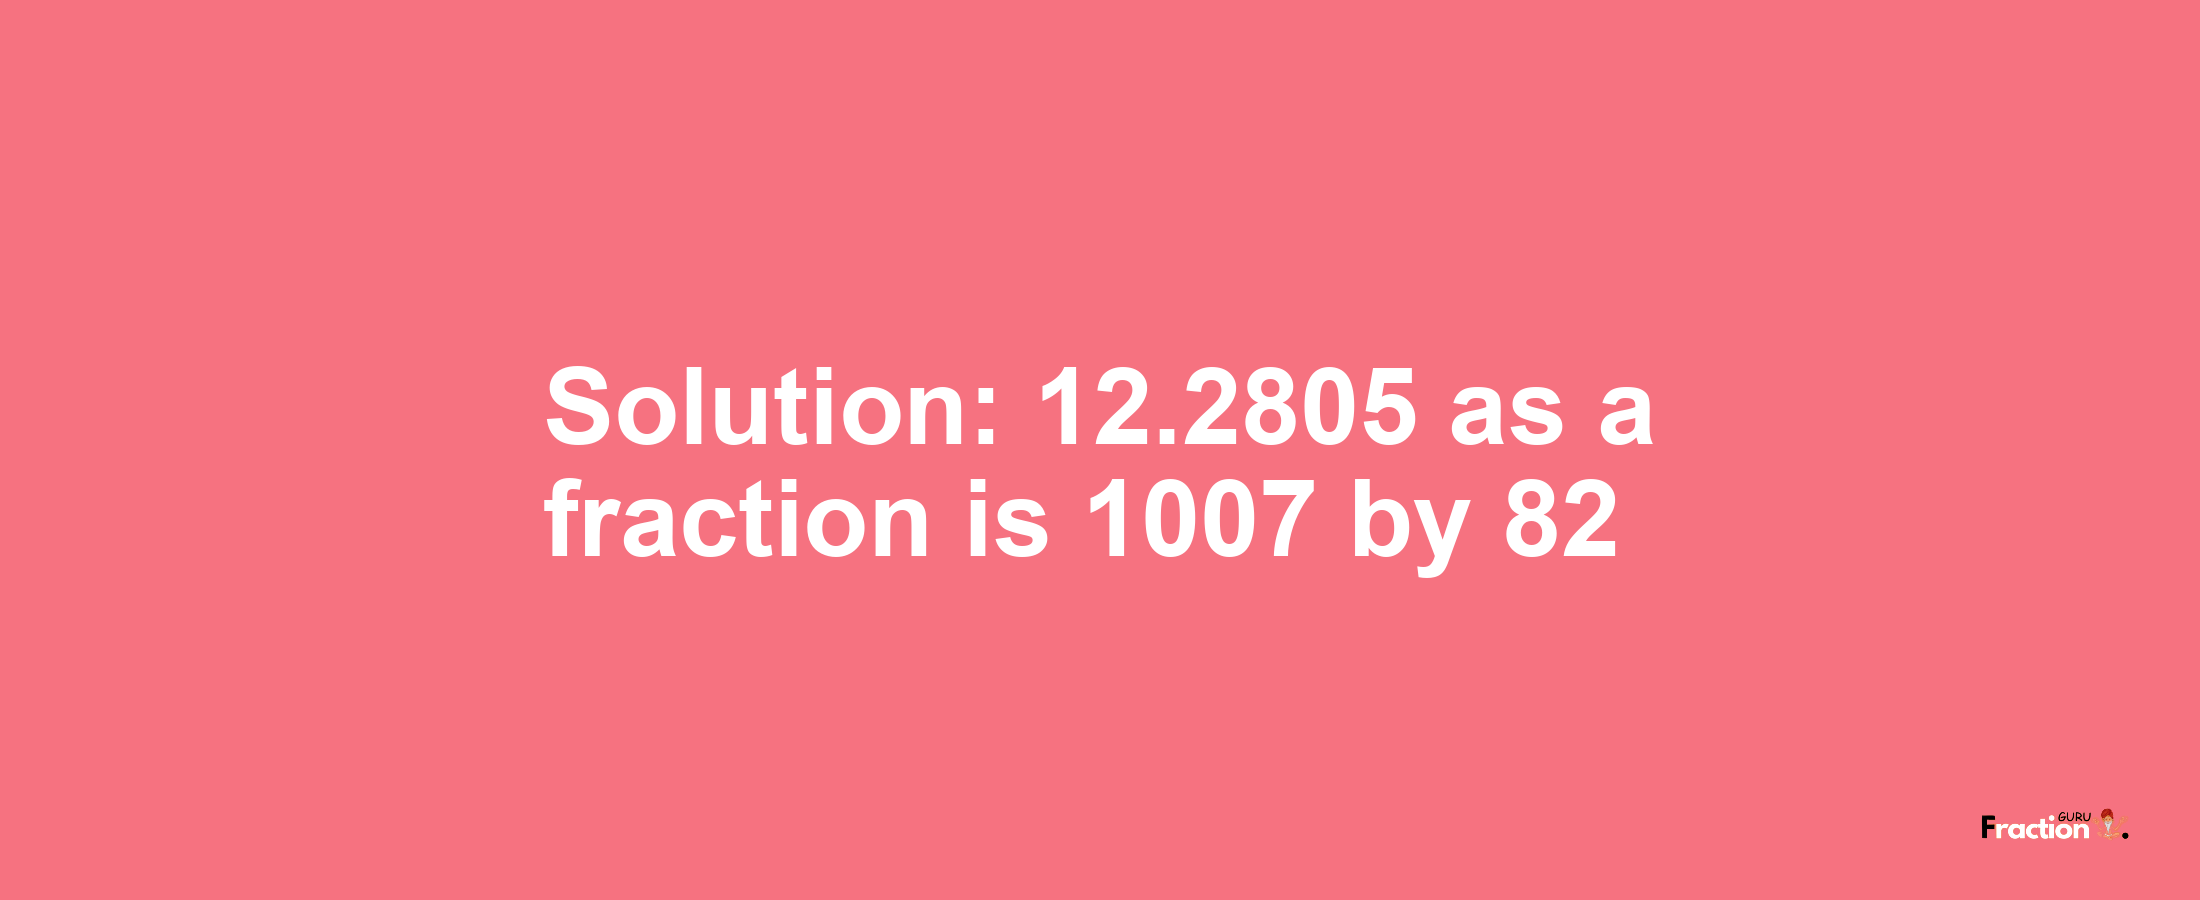 Solution:12.2805 as a fraction is 1007/82